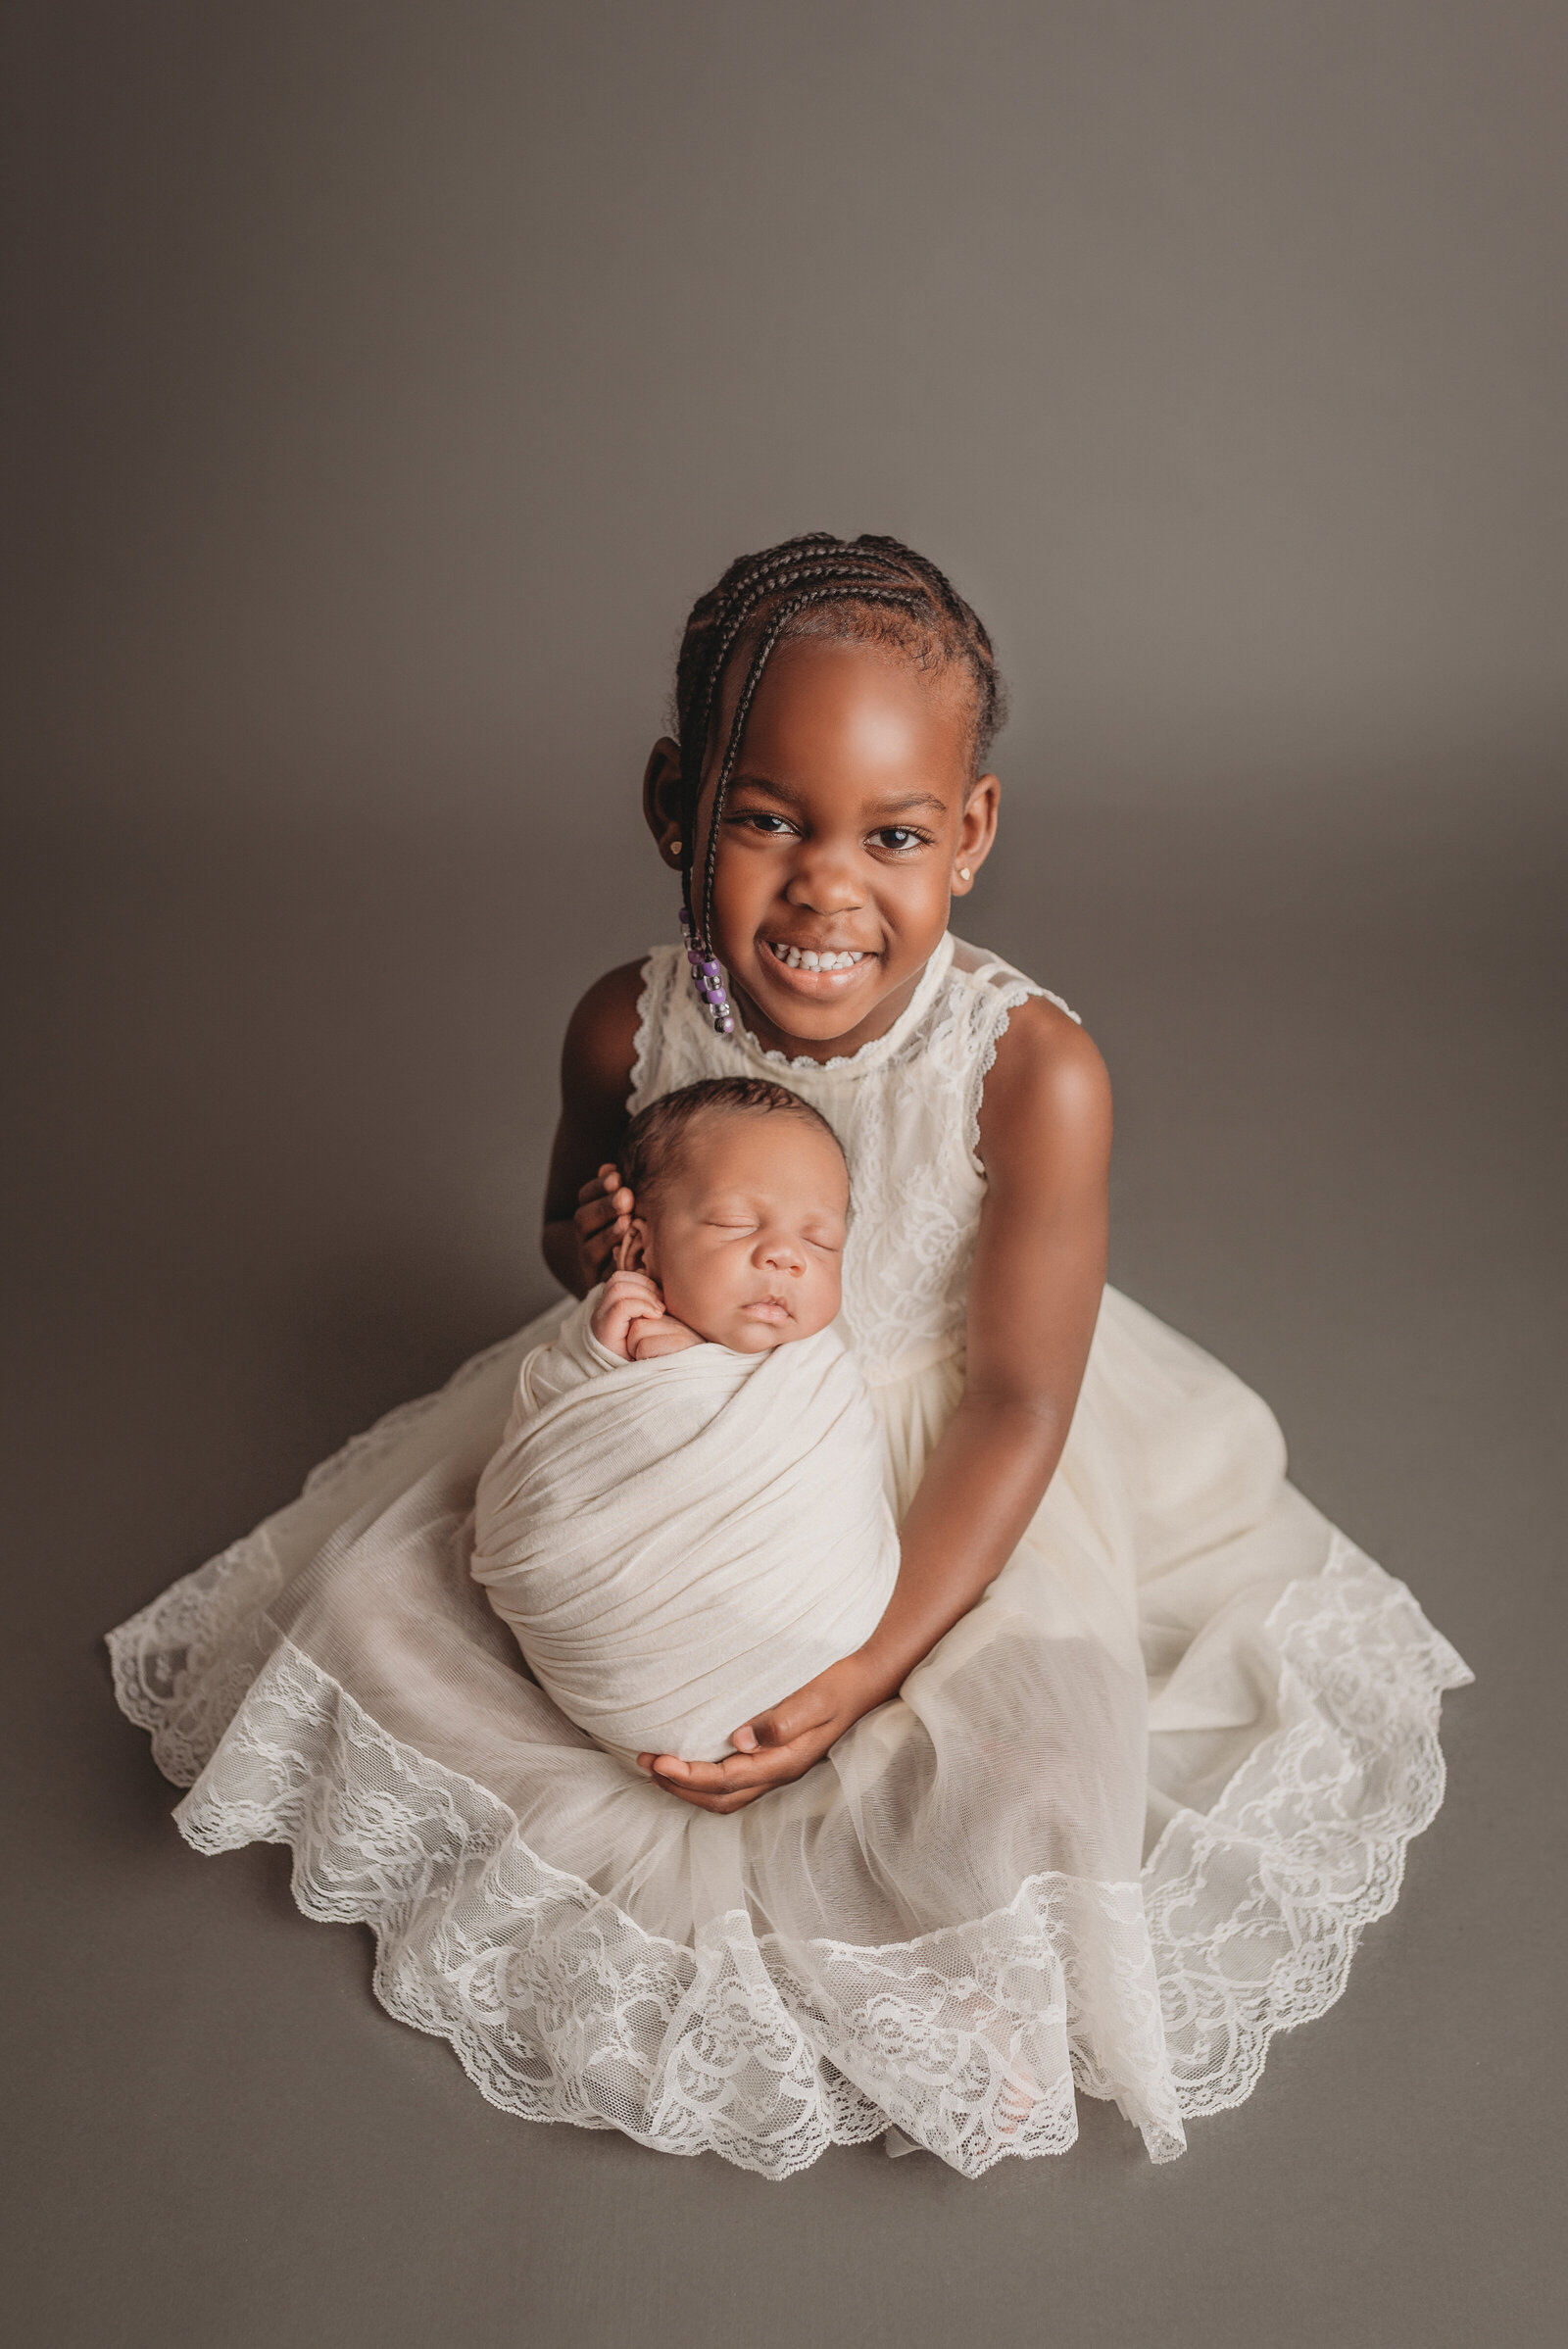 Sisters, 4 year old and newborn, portrait with big sister holding newborn sister under the head and bottom while smiling